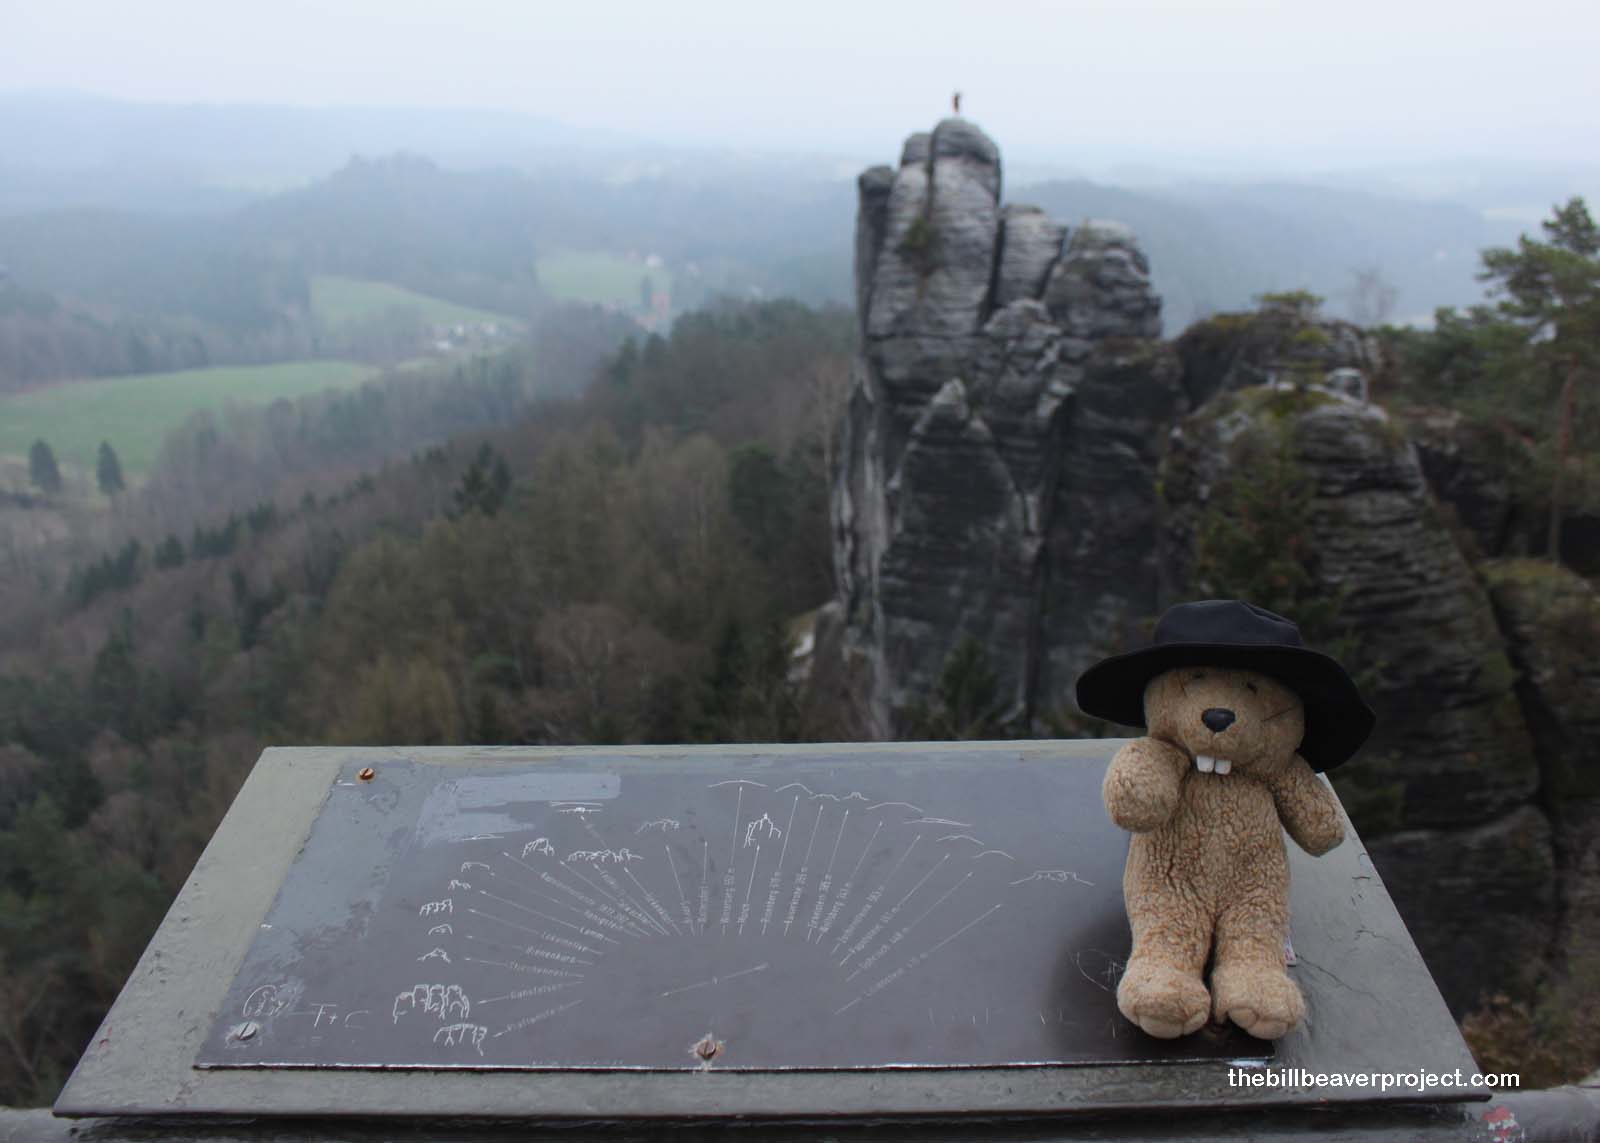 That blurry figure on the Mönchstein pinnacle is a monk!